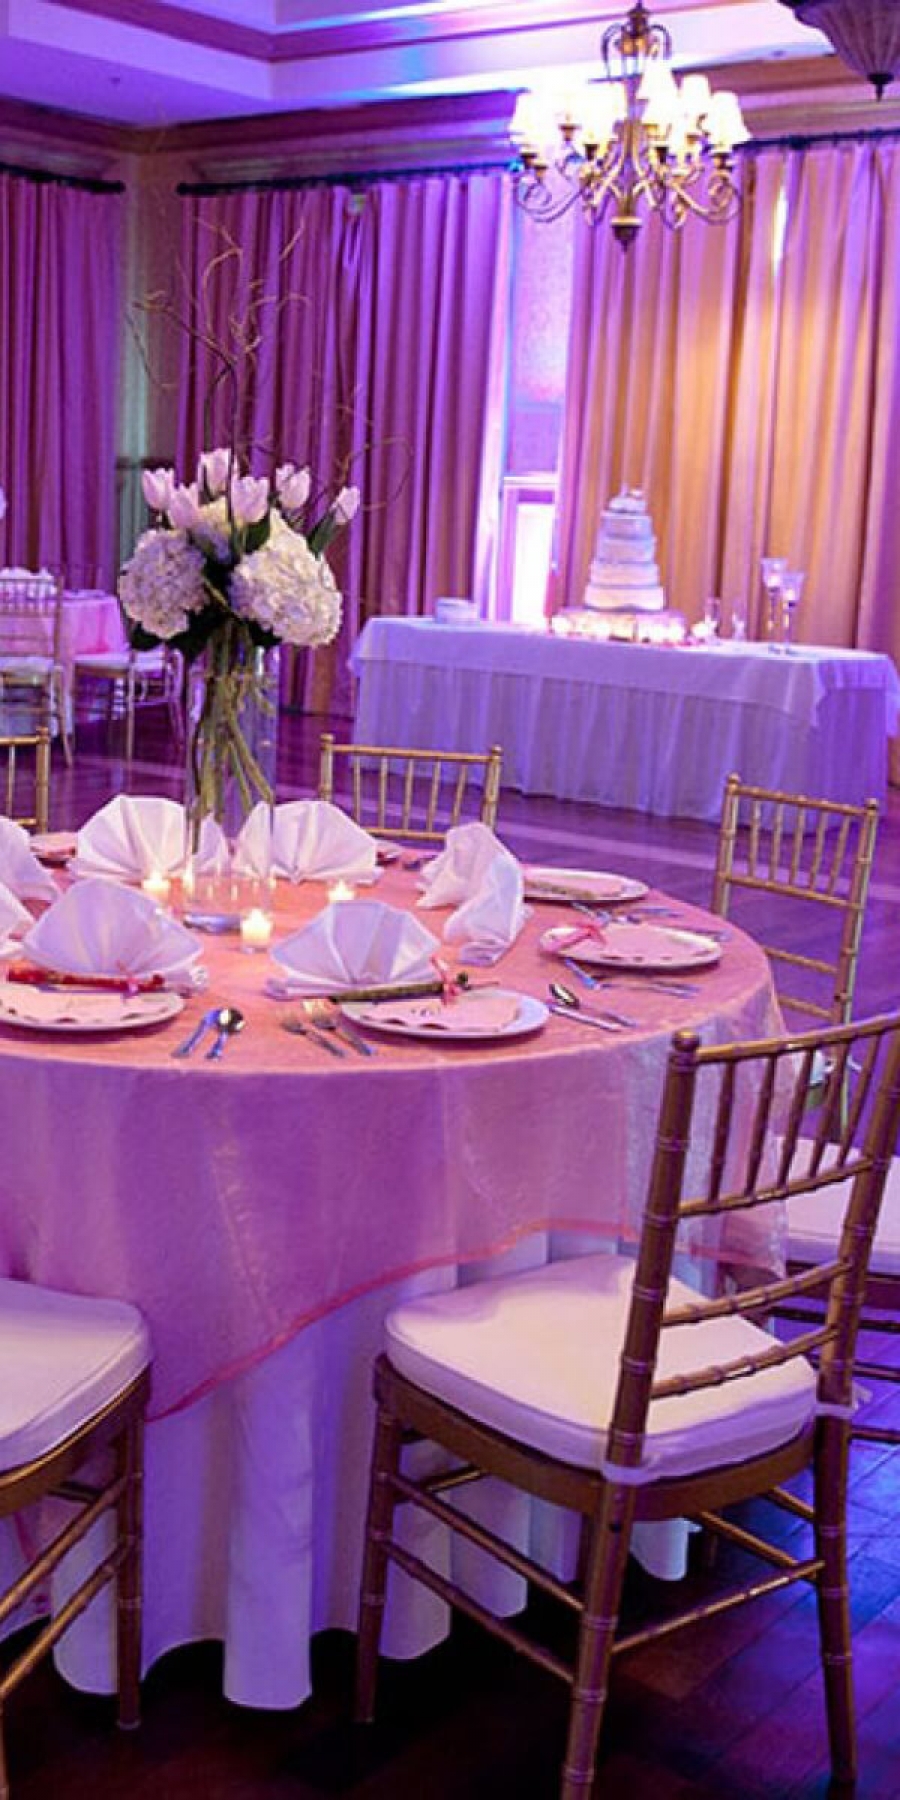 Event Type placeholder - image of a ballroom decorated with a wedding cake, round tables with white linens, chairs &amp; pink uplighting.